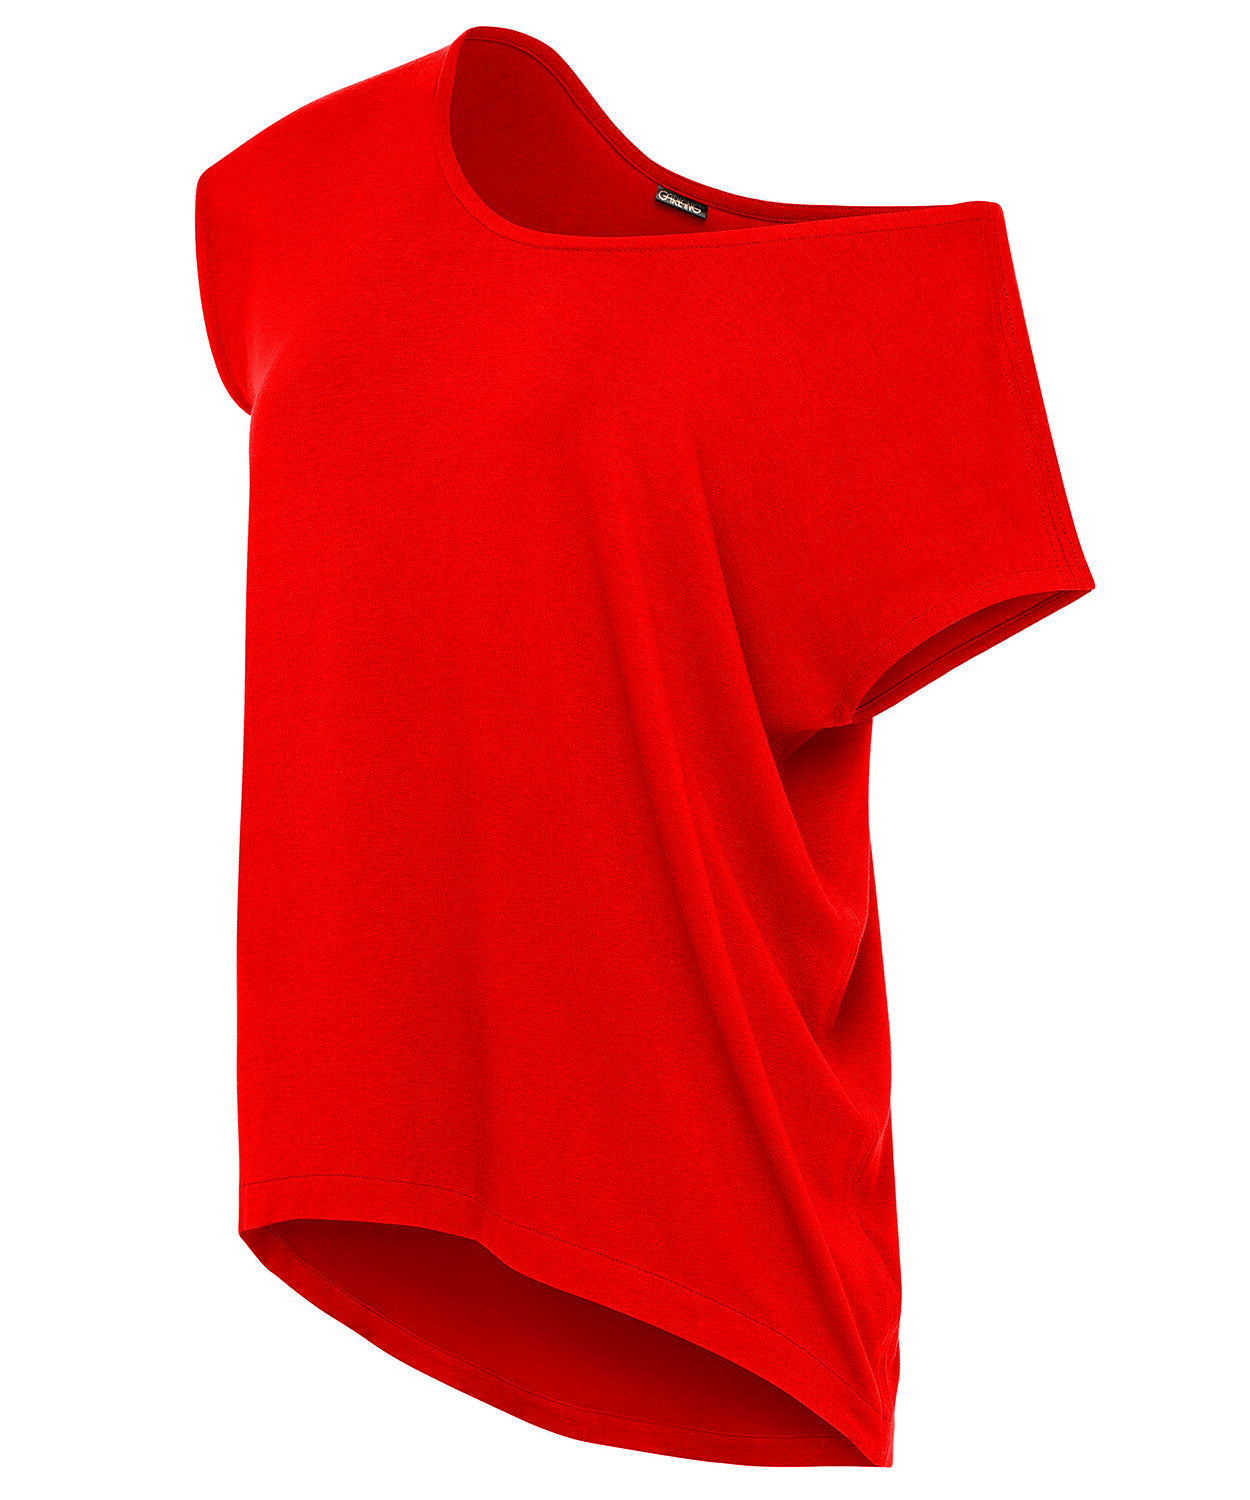 Women's Off Shoulder Shirts - Casual Loose Short Sleeve - Red